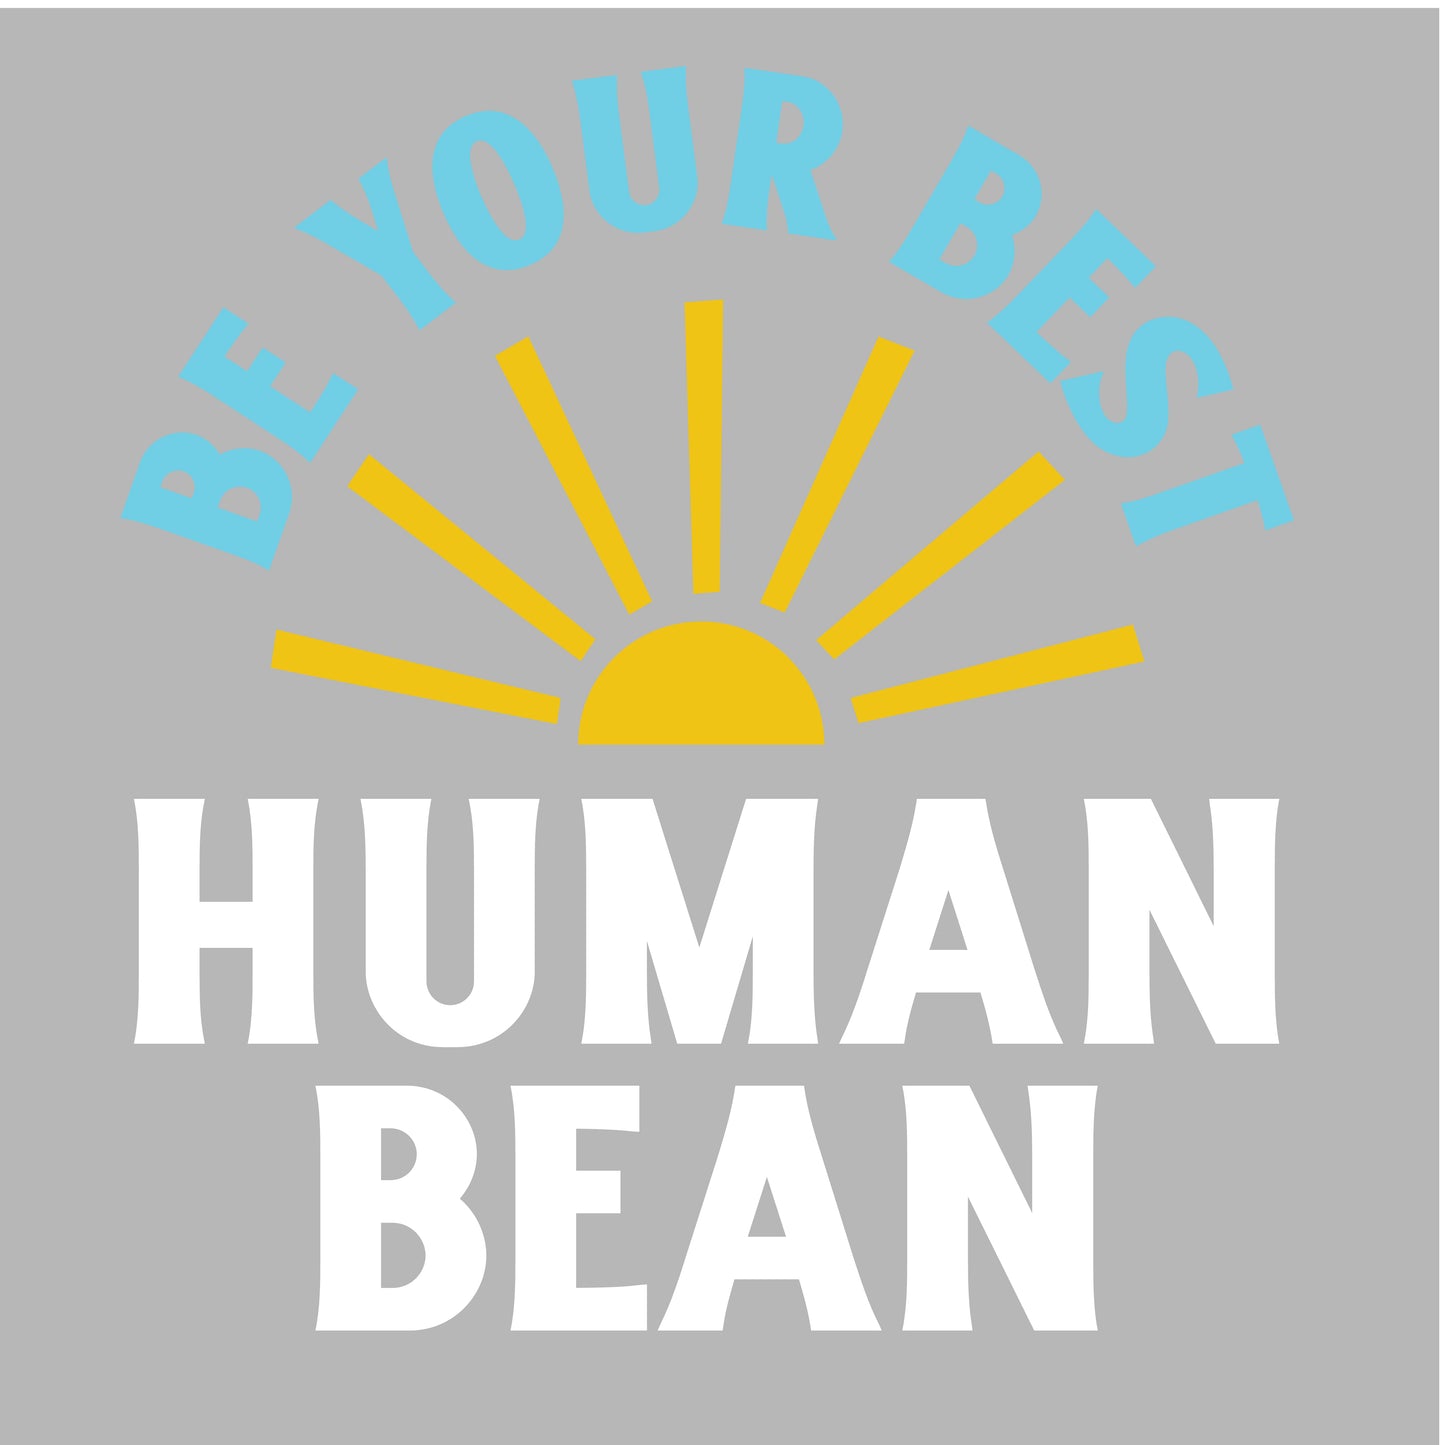 Be Your Best Human Bean Decal